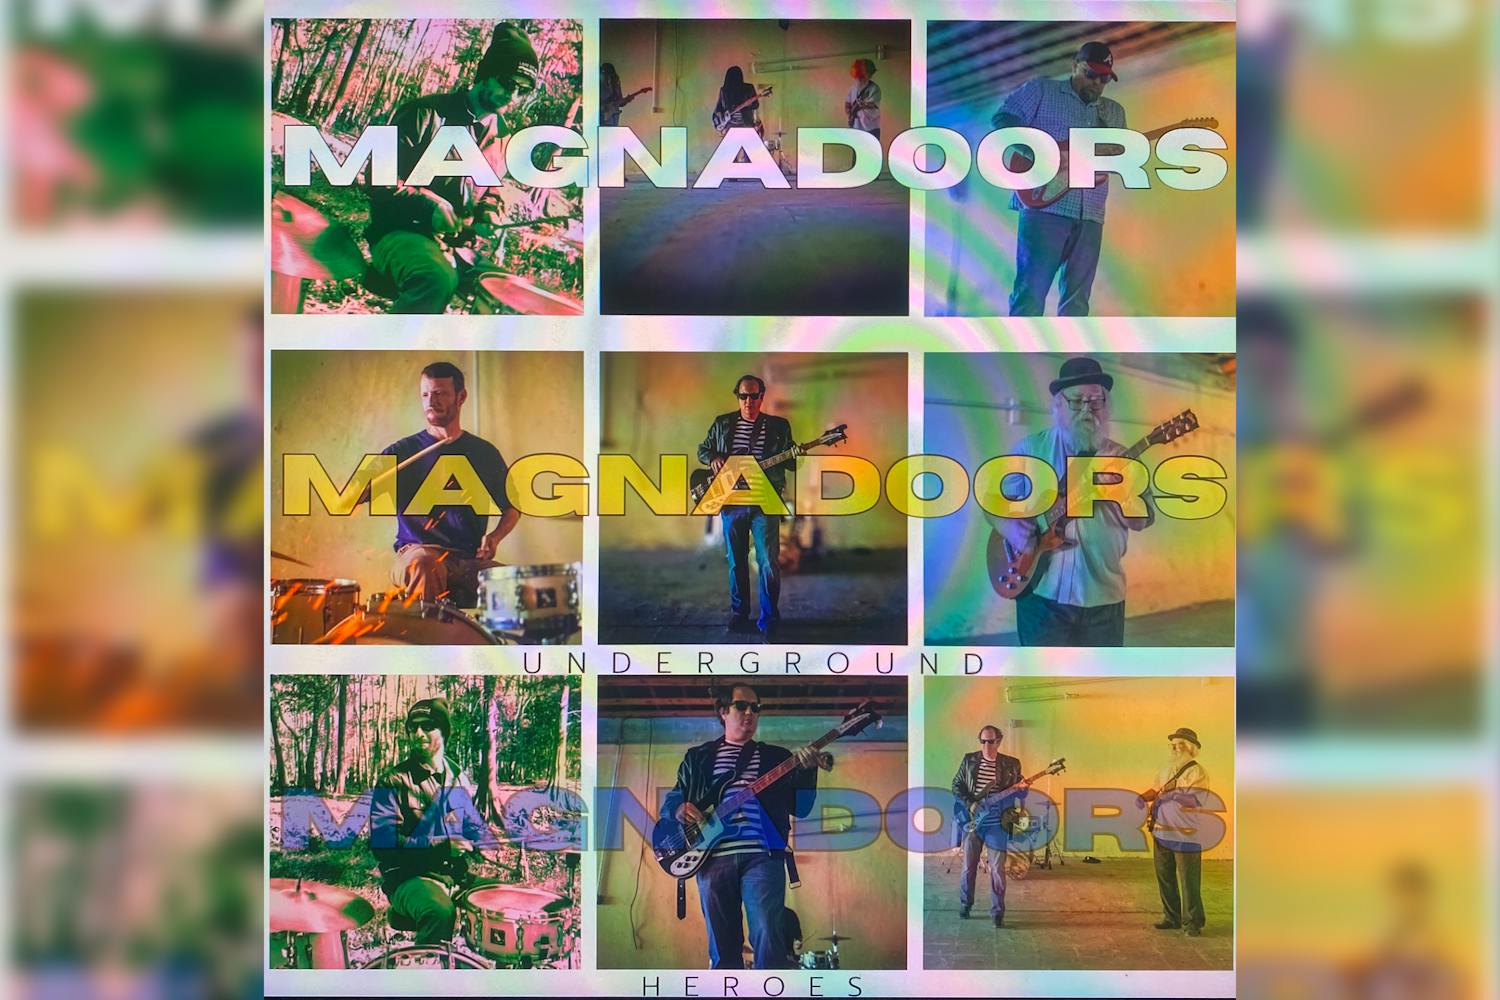 Album artwork for The Magnadoors’ debut album titled “Underground Heroes.” The South Carolina-based rock and roll band will hold a release party for the album on April 19, 2024 at the Grand Old Post Office in Darlington, ɫɫƵ.